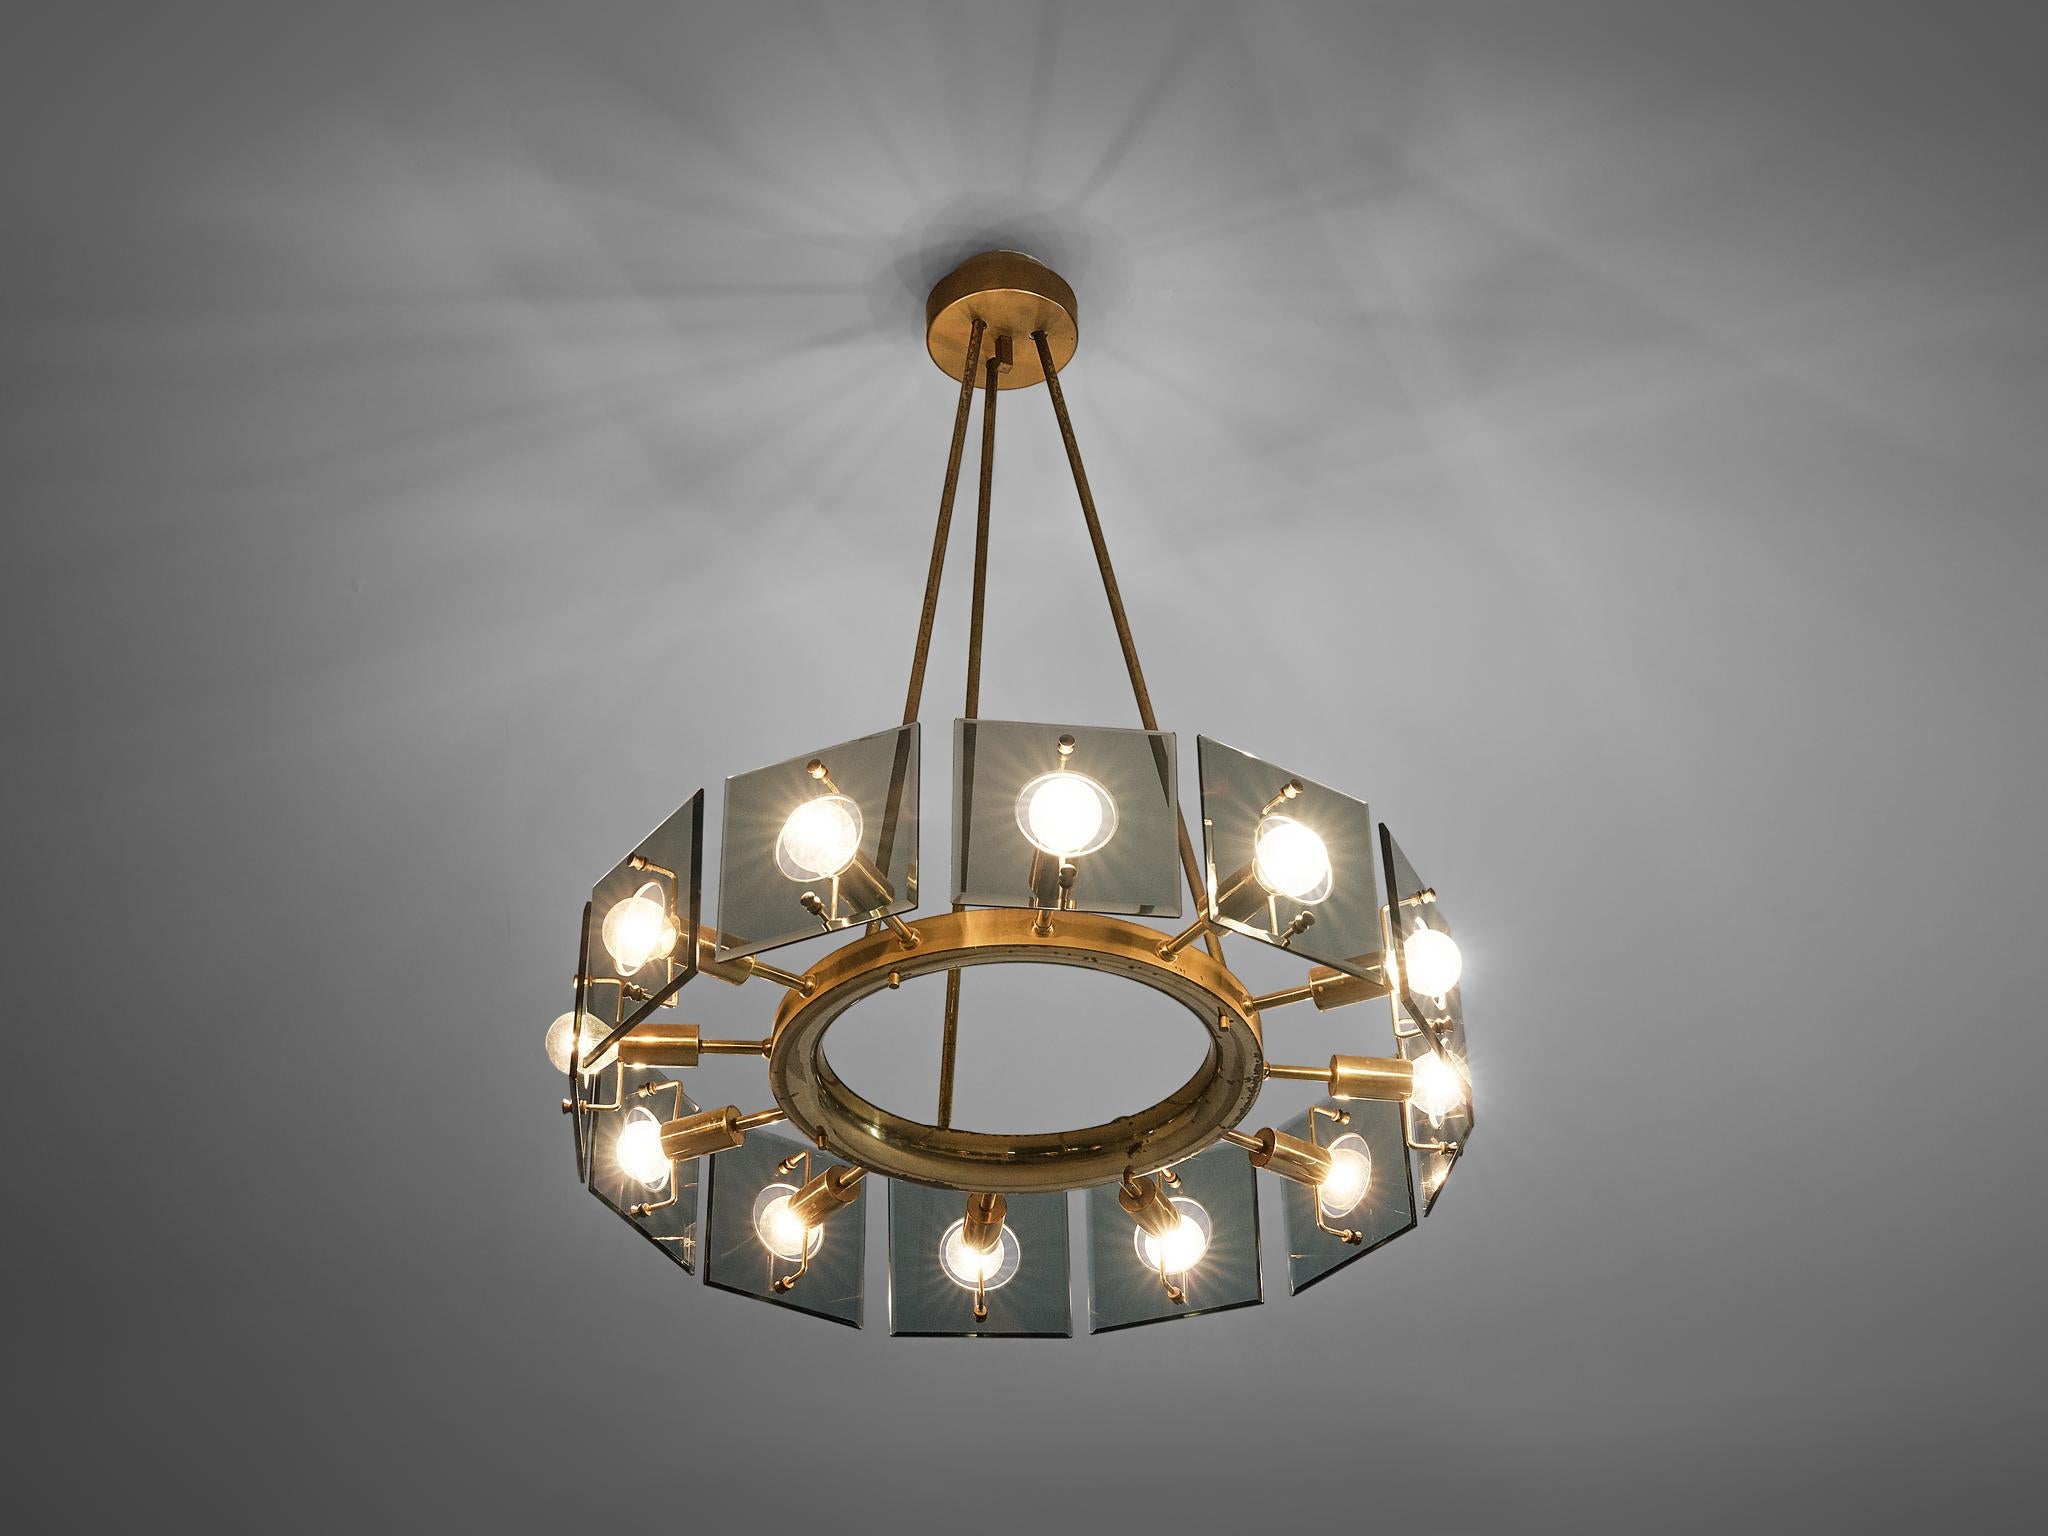 Gino Paroldo, chandelier, glass, metal, brass, Italy, 1960s

Stunning round chandelier in glass, metal and brass designed by Gino Paroldo. A round center holds twelve light bulbs behind tempered squared glass plates. The circle is held by three thin